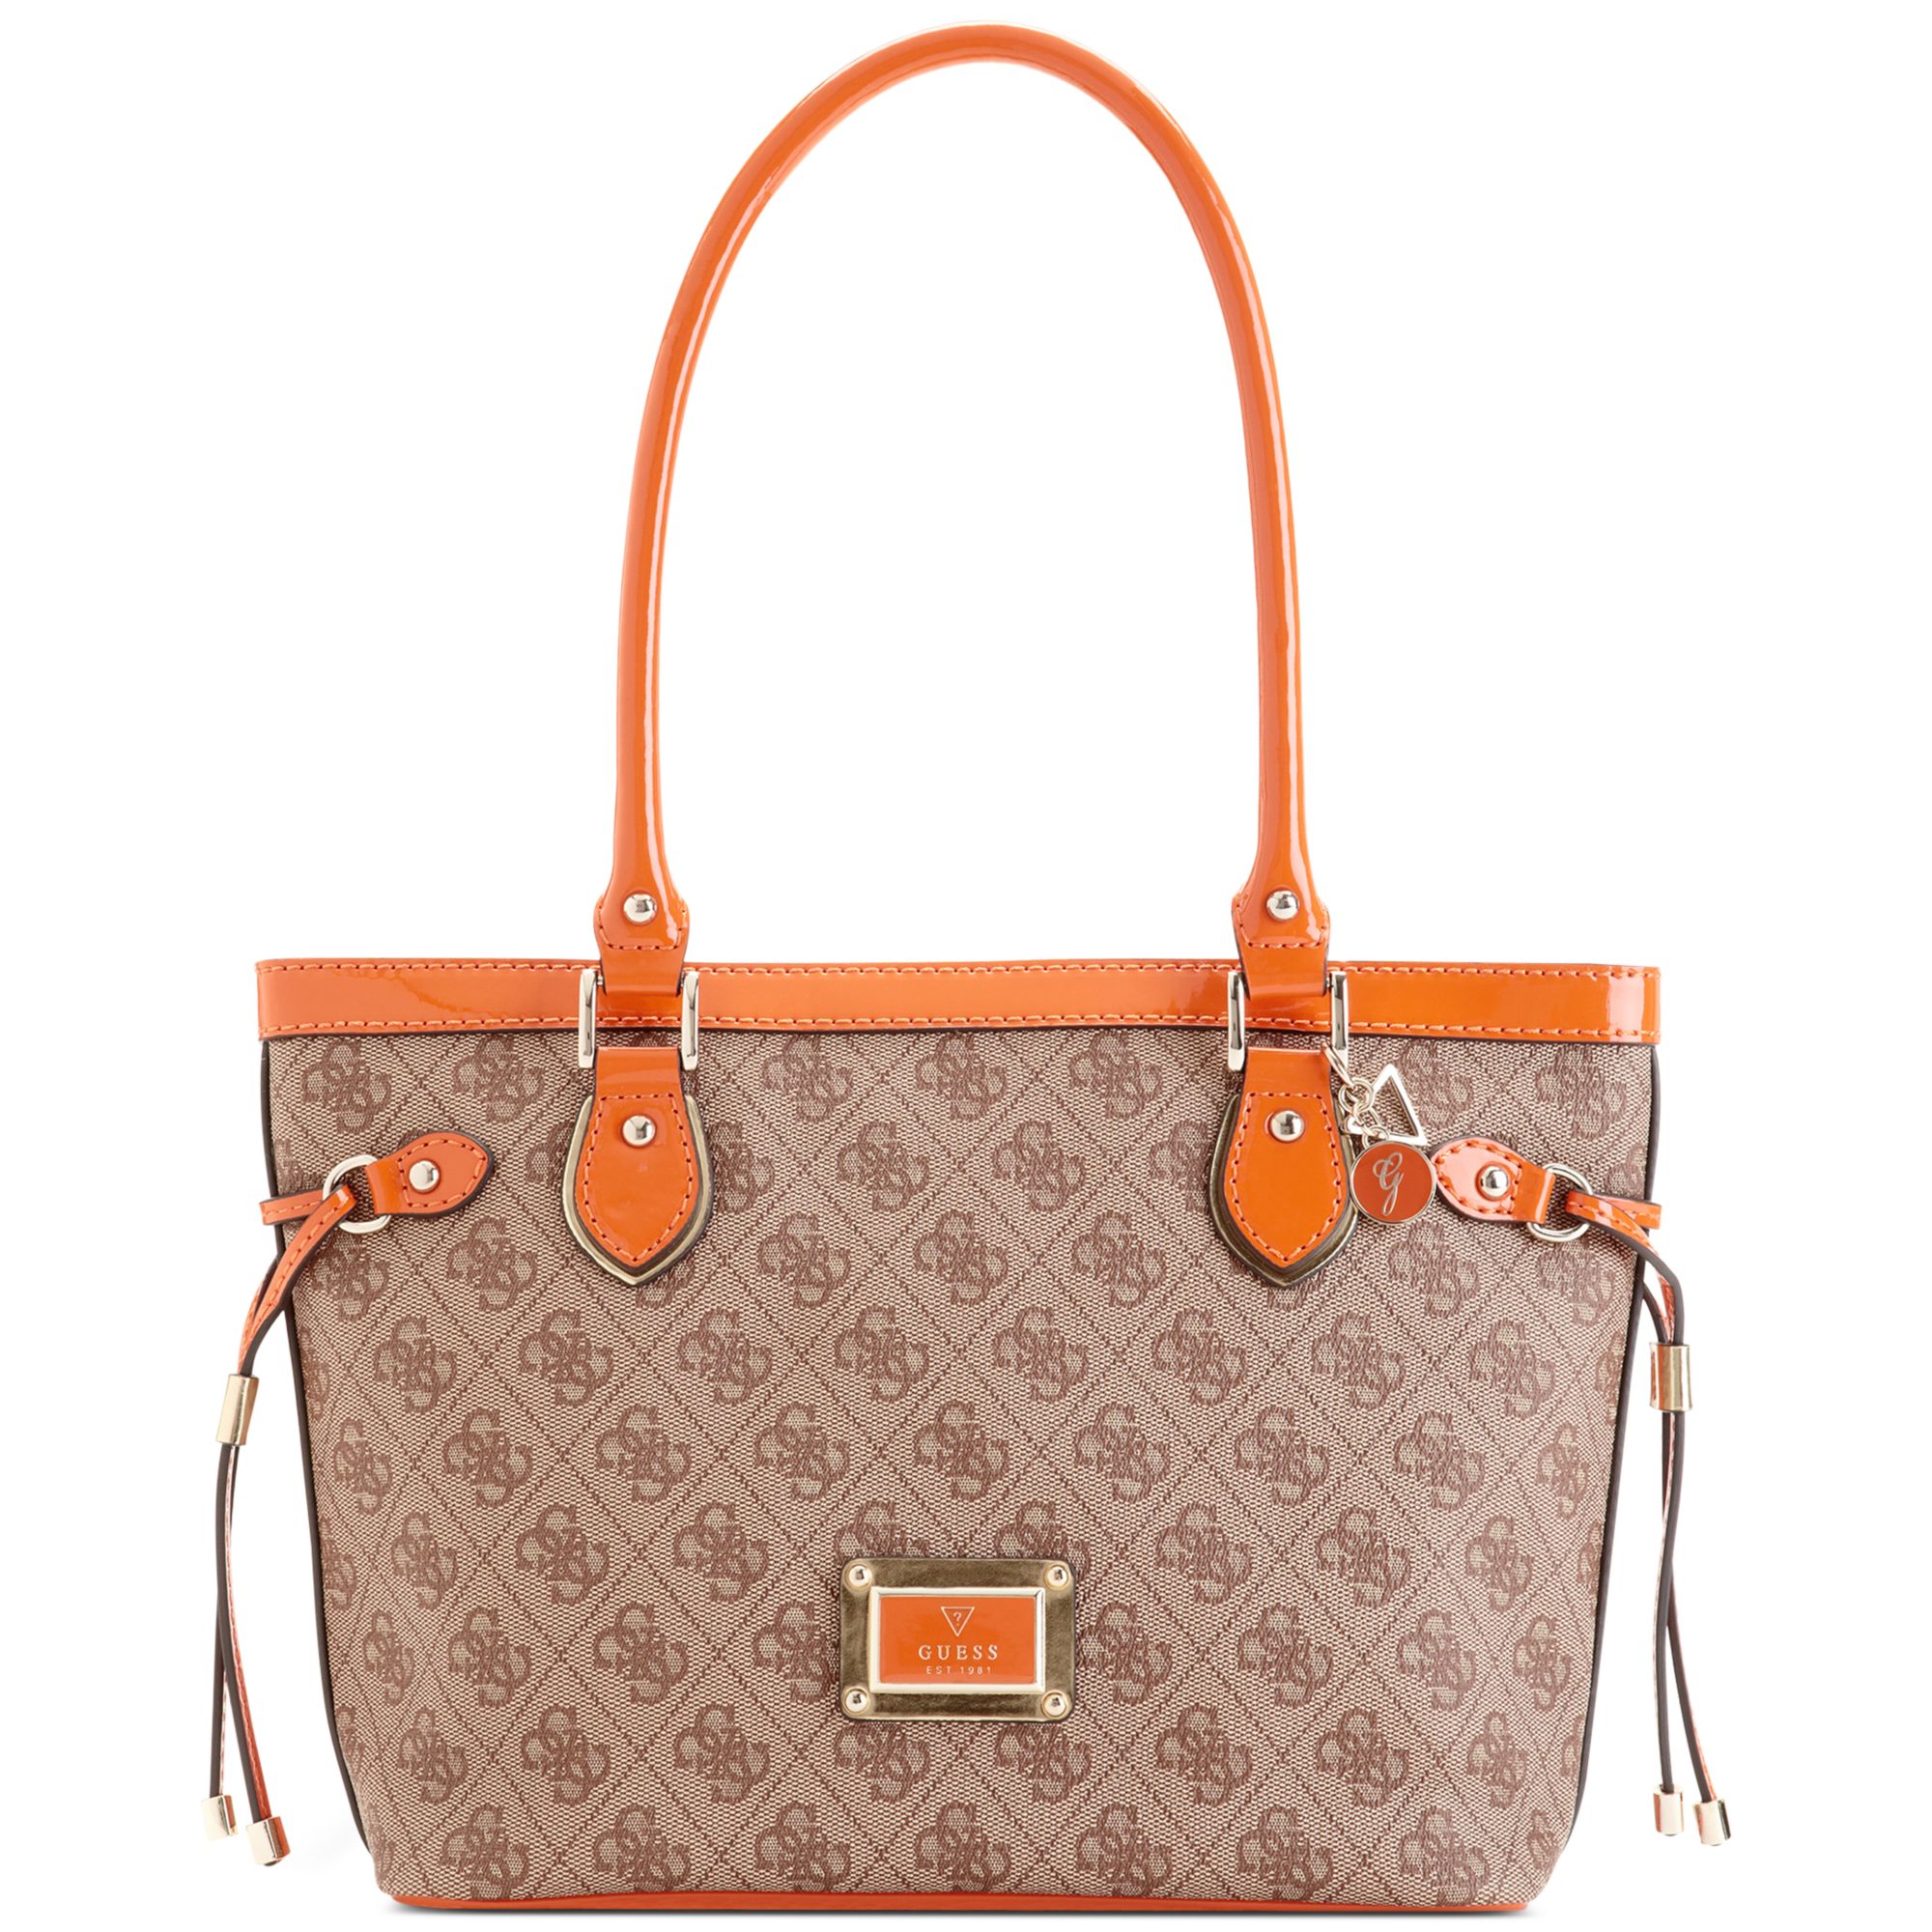 Lyst - Guess Guess Handbag Reama Small Classic Tote in Orange